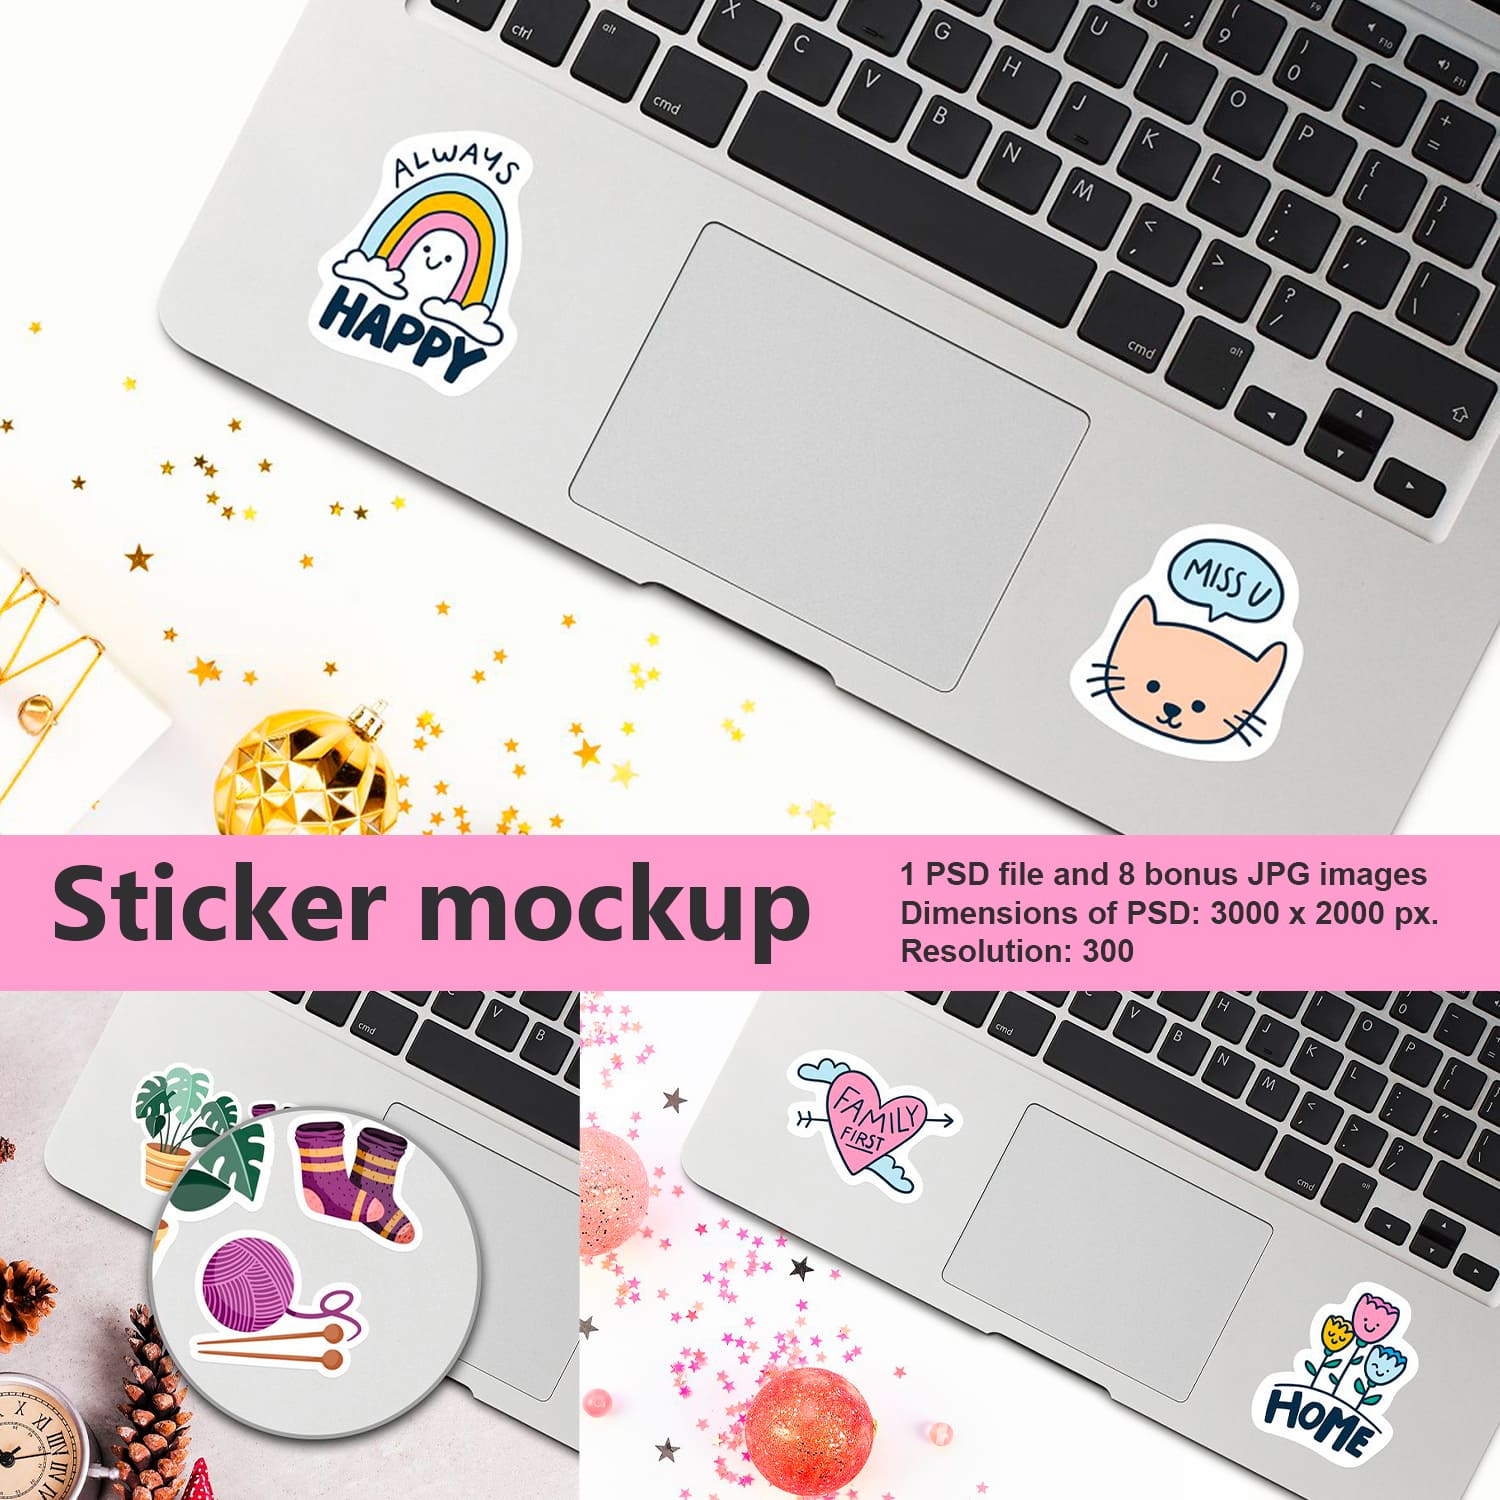 Collection of laptop images with adorable stickers.